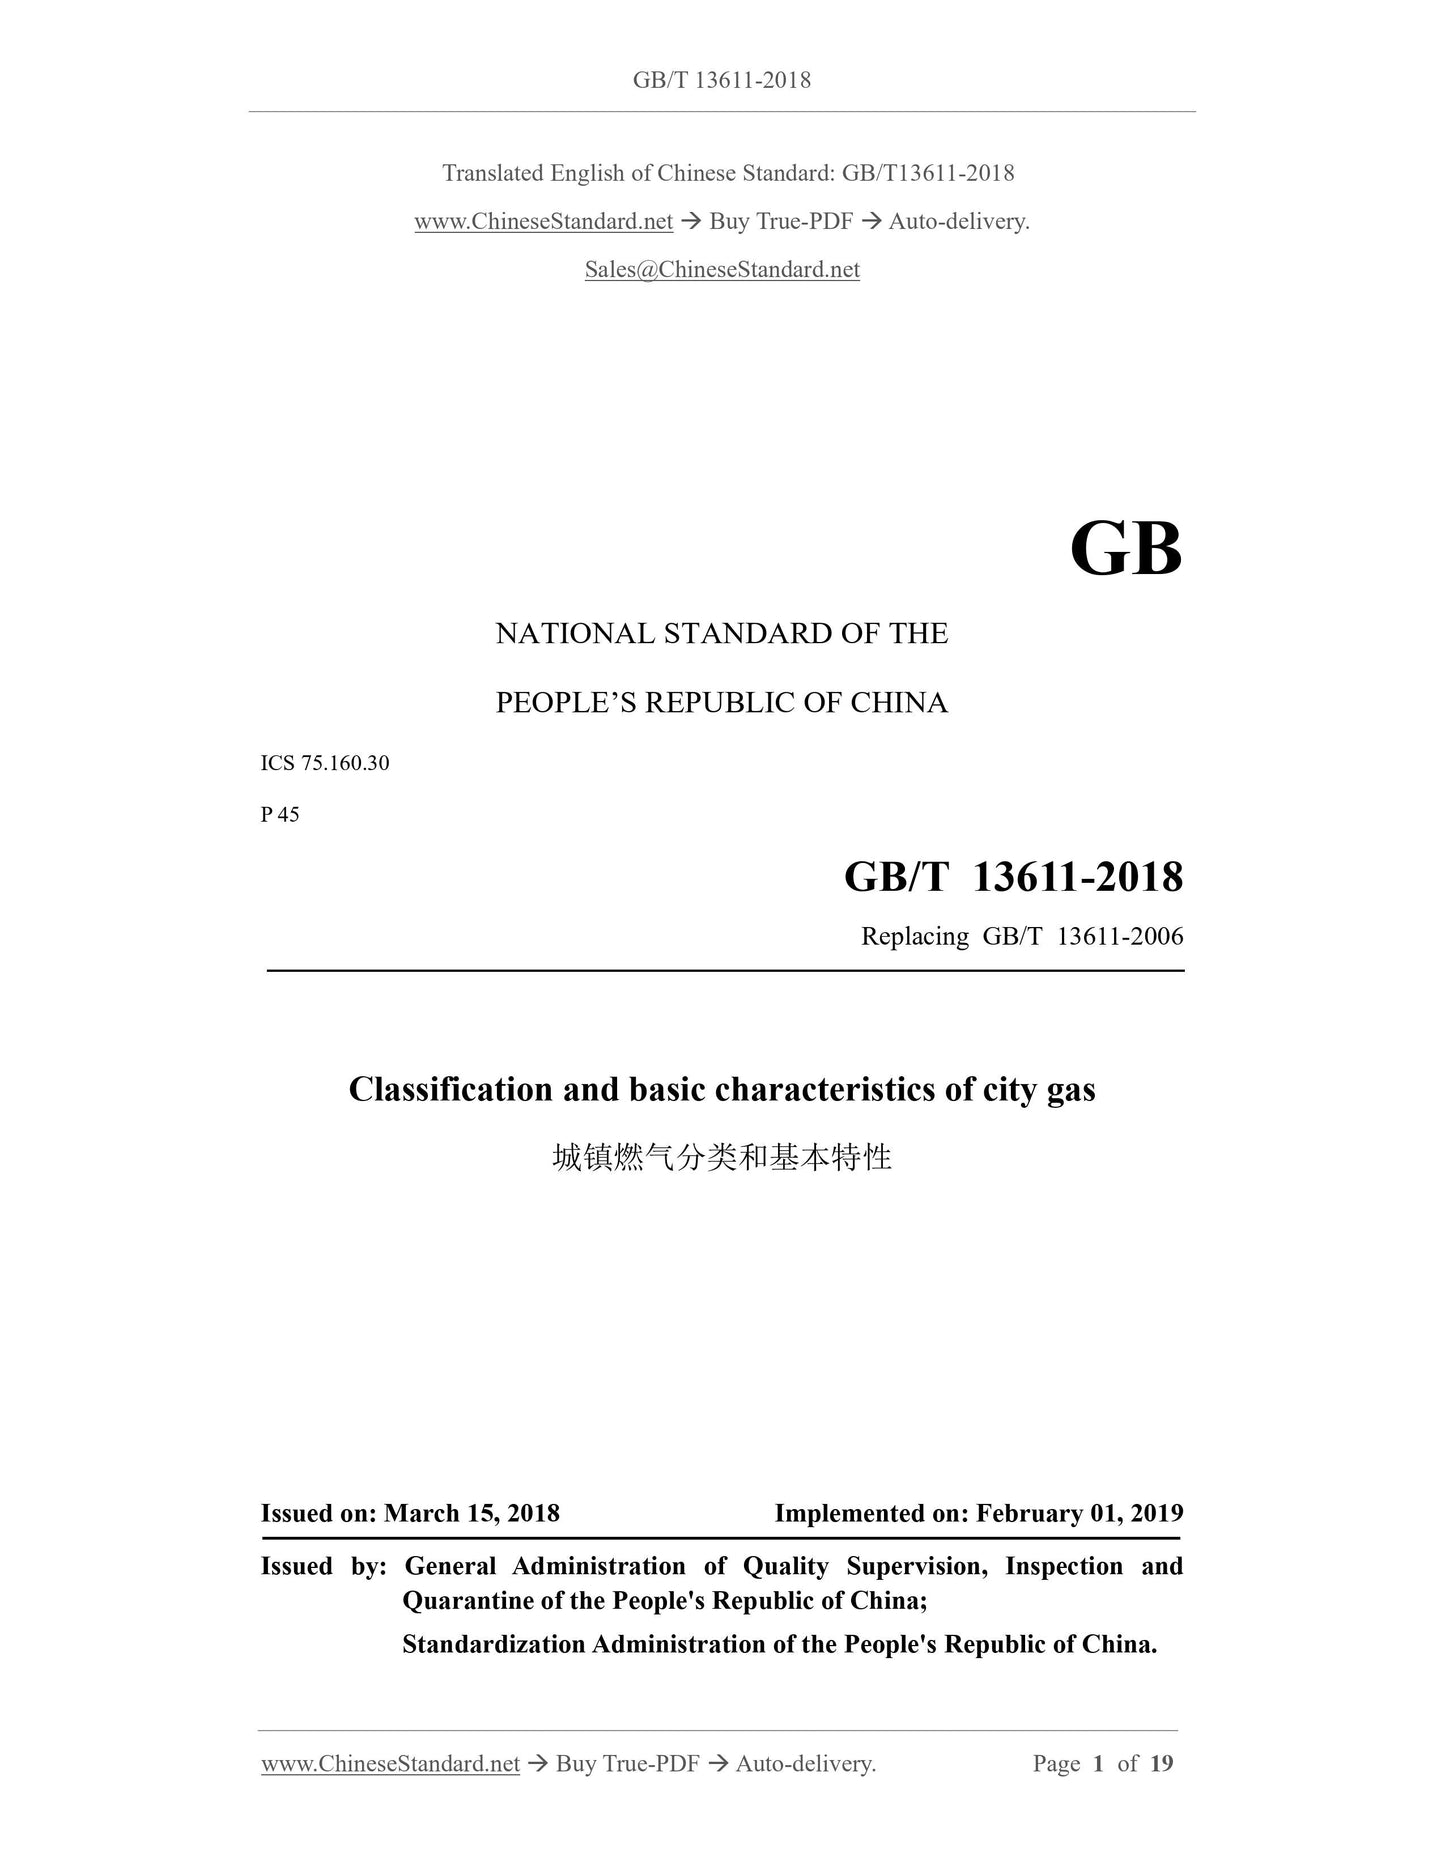 GB/T 13611-2018 Page 1